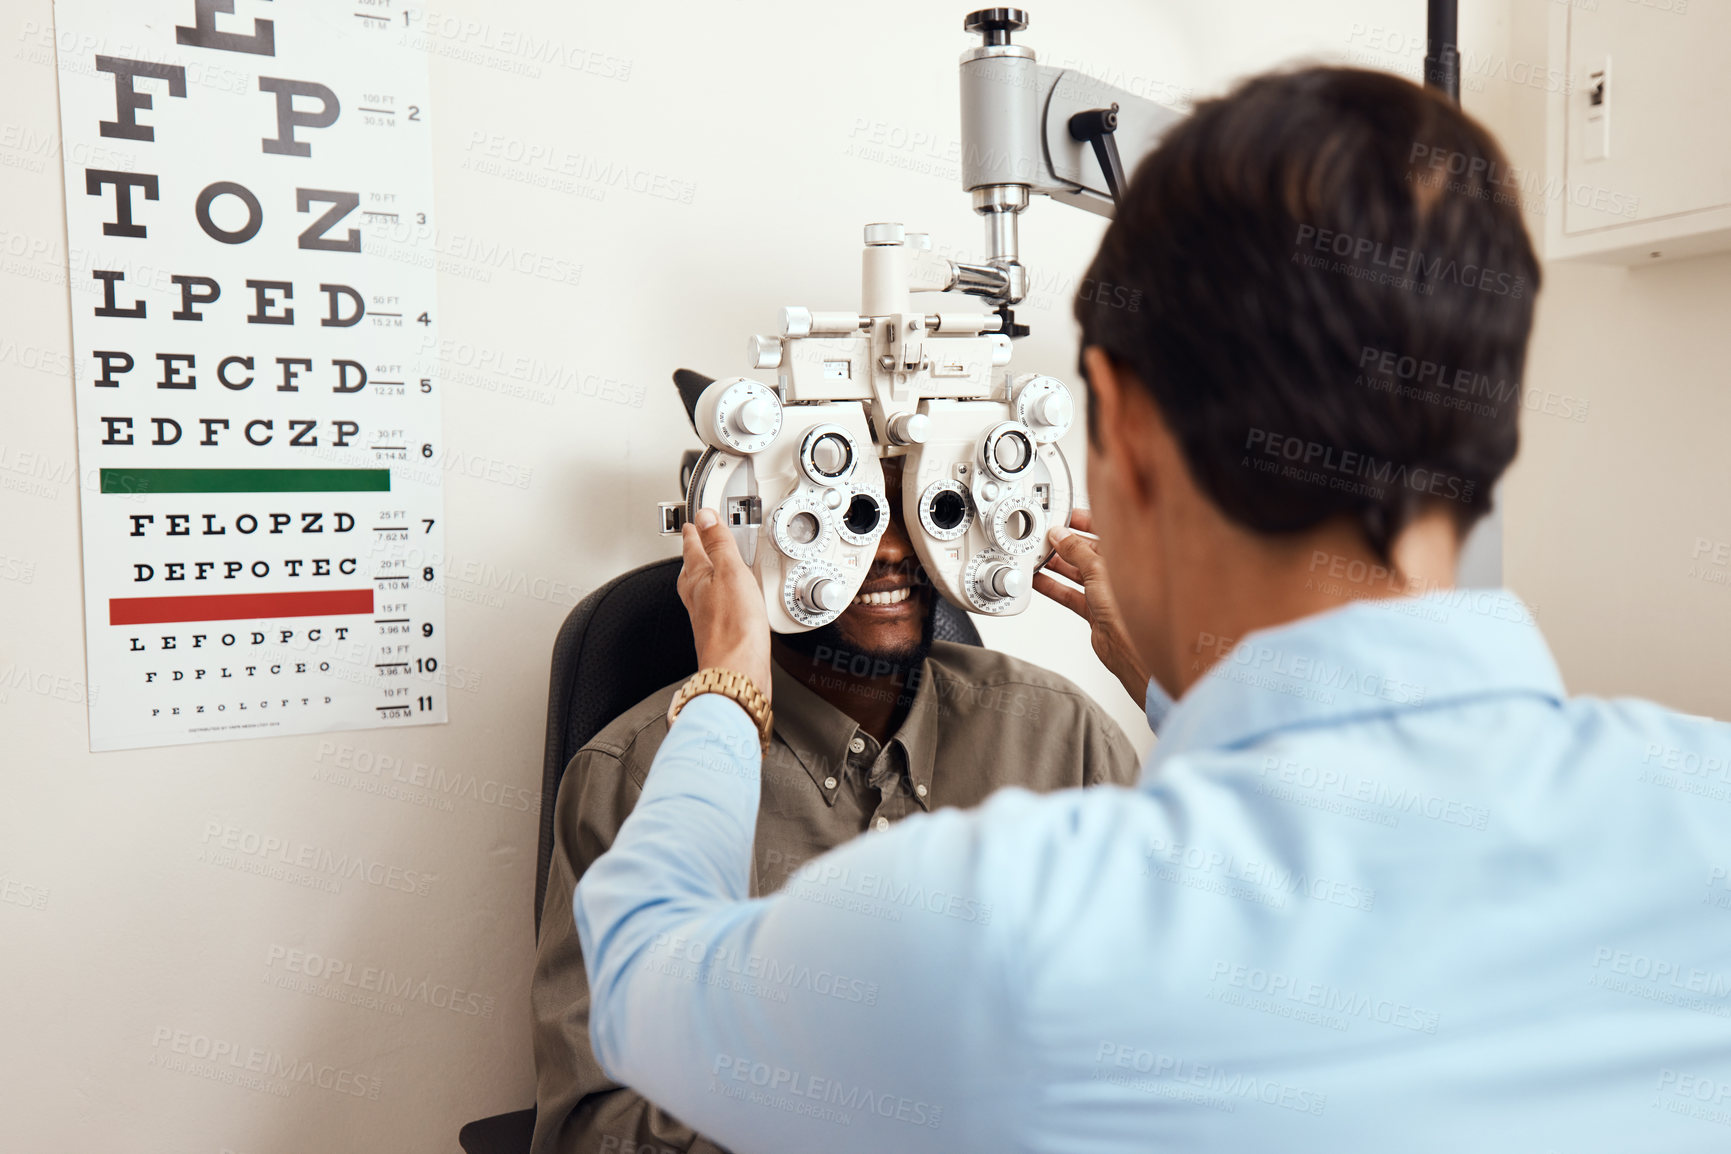 Buy stock photo Shot of an optometrist examining her patient’s eyes with an optical refractor